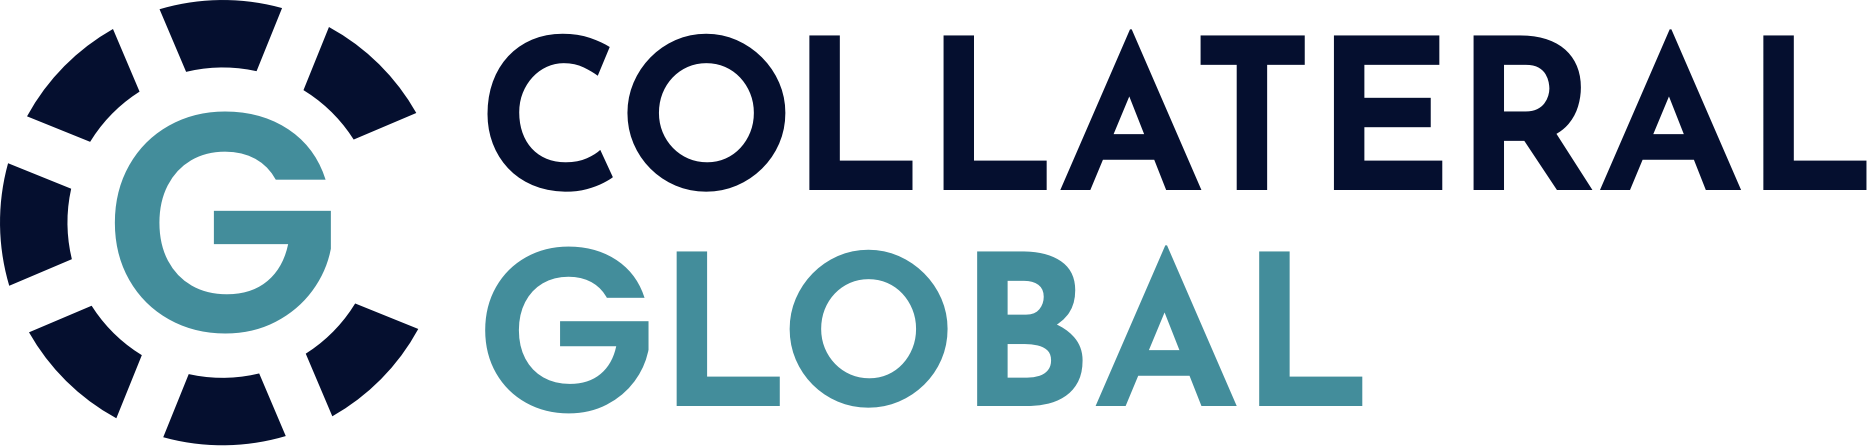 collateralglobal.org